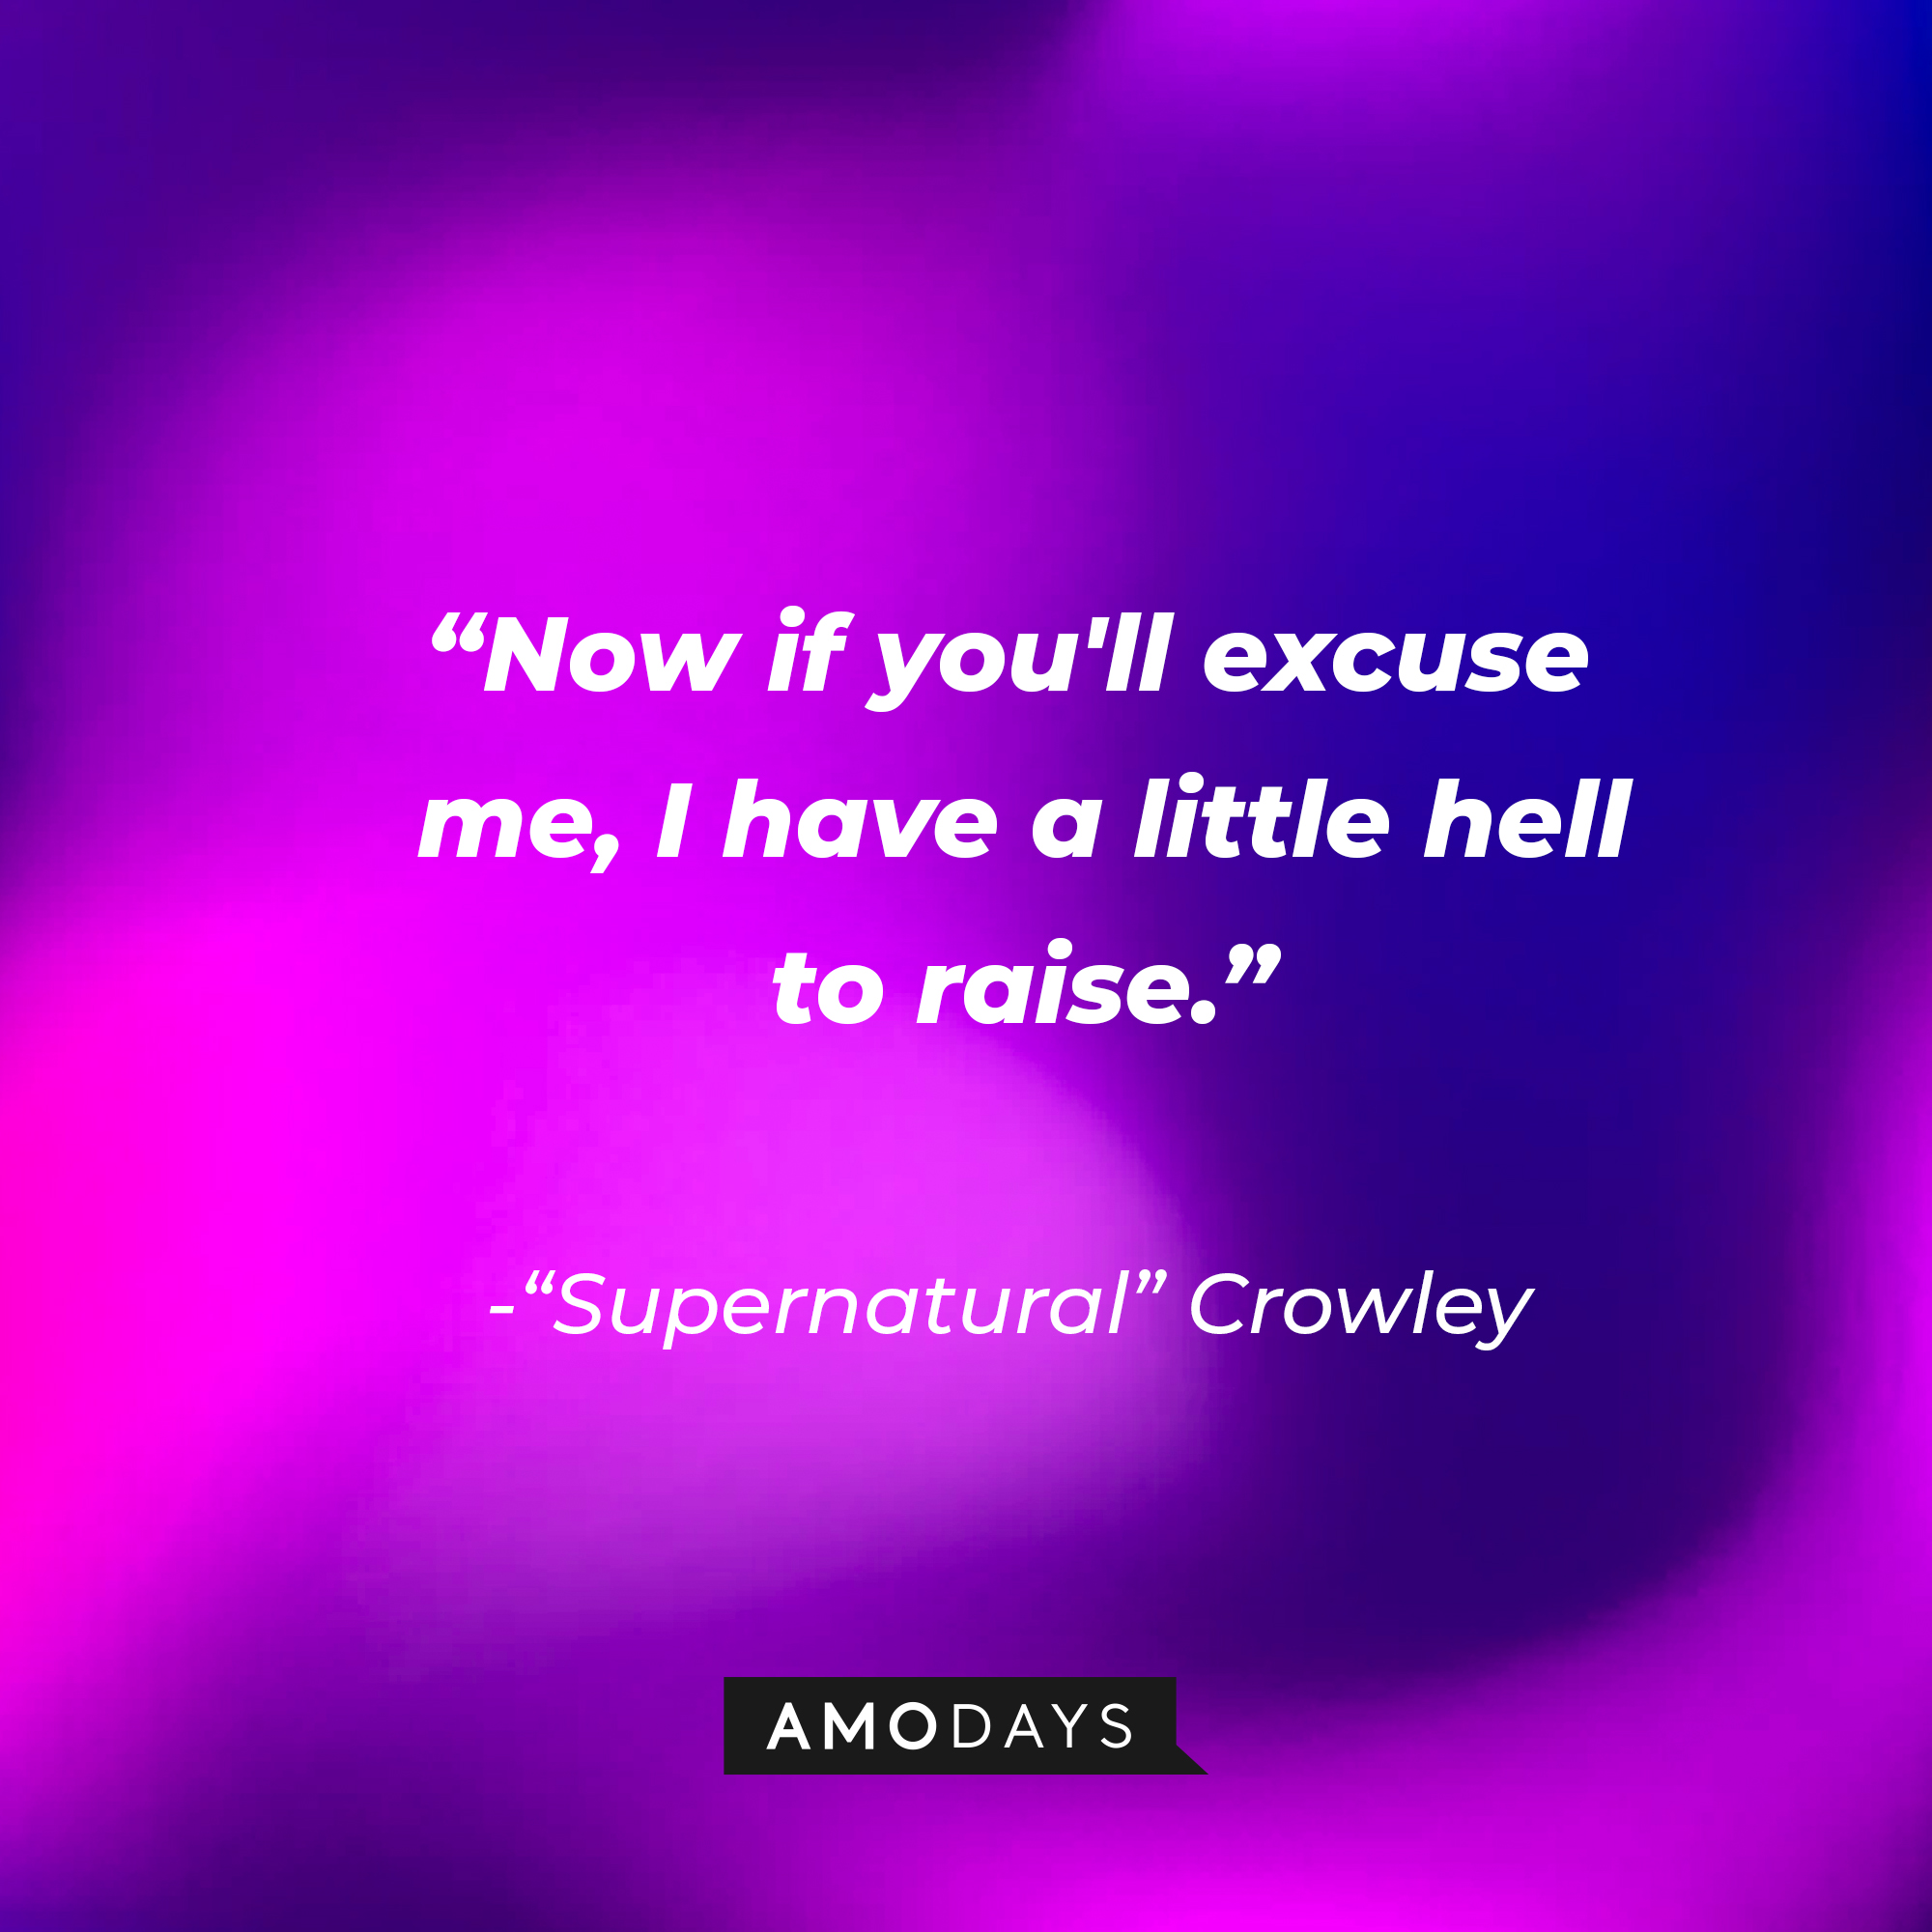 "Supernatural" Crowley's quote: "Now if you'll excuse me, I have a little hell to raise." | Source: AmoDays